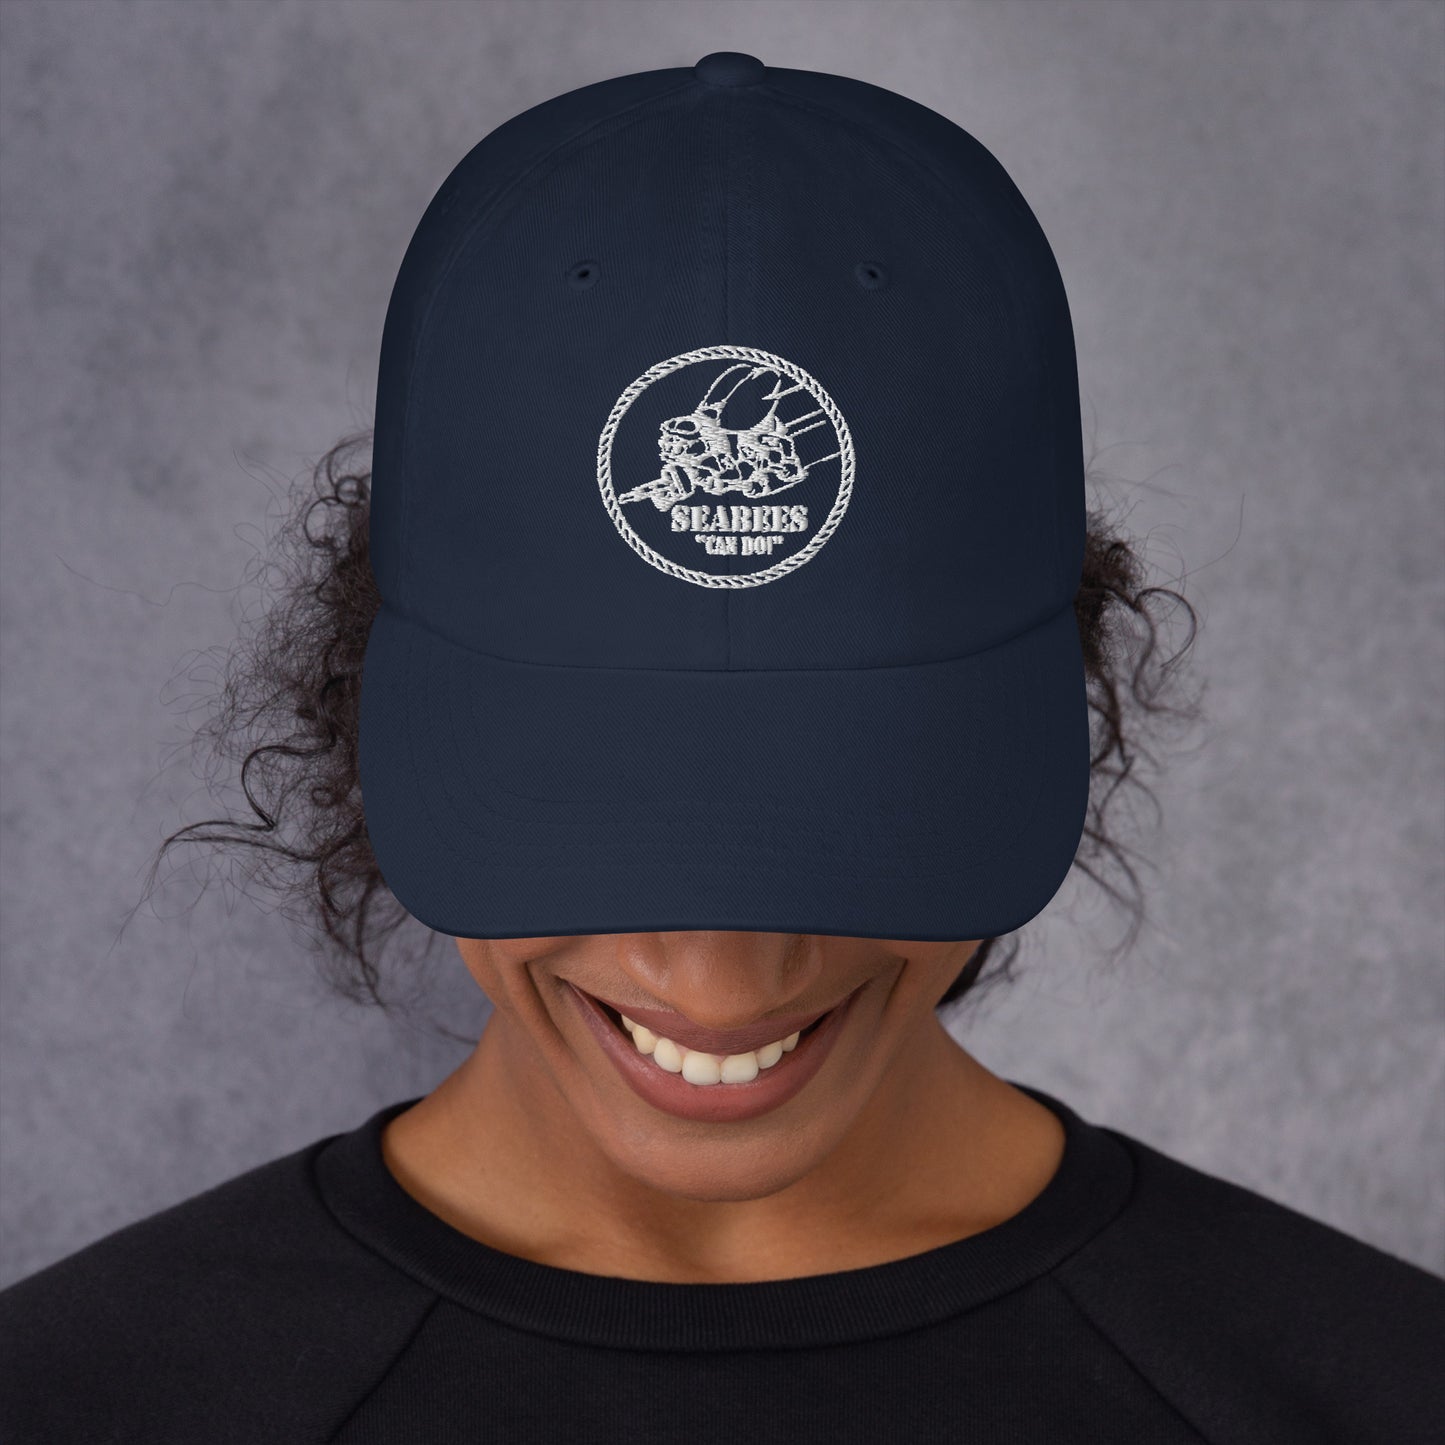 US Navy Seabees Embroidery Classic Dad Hat